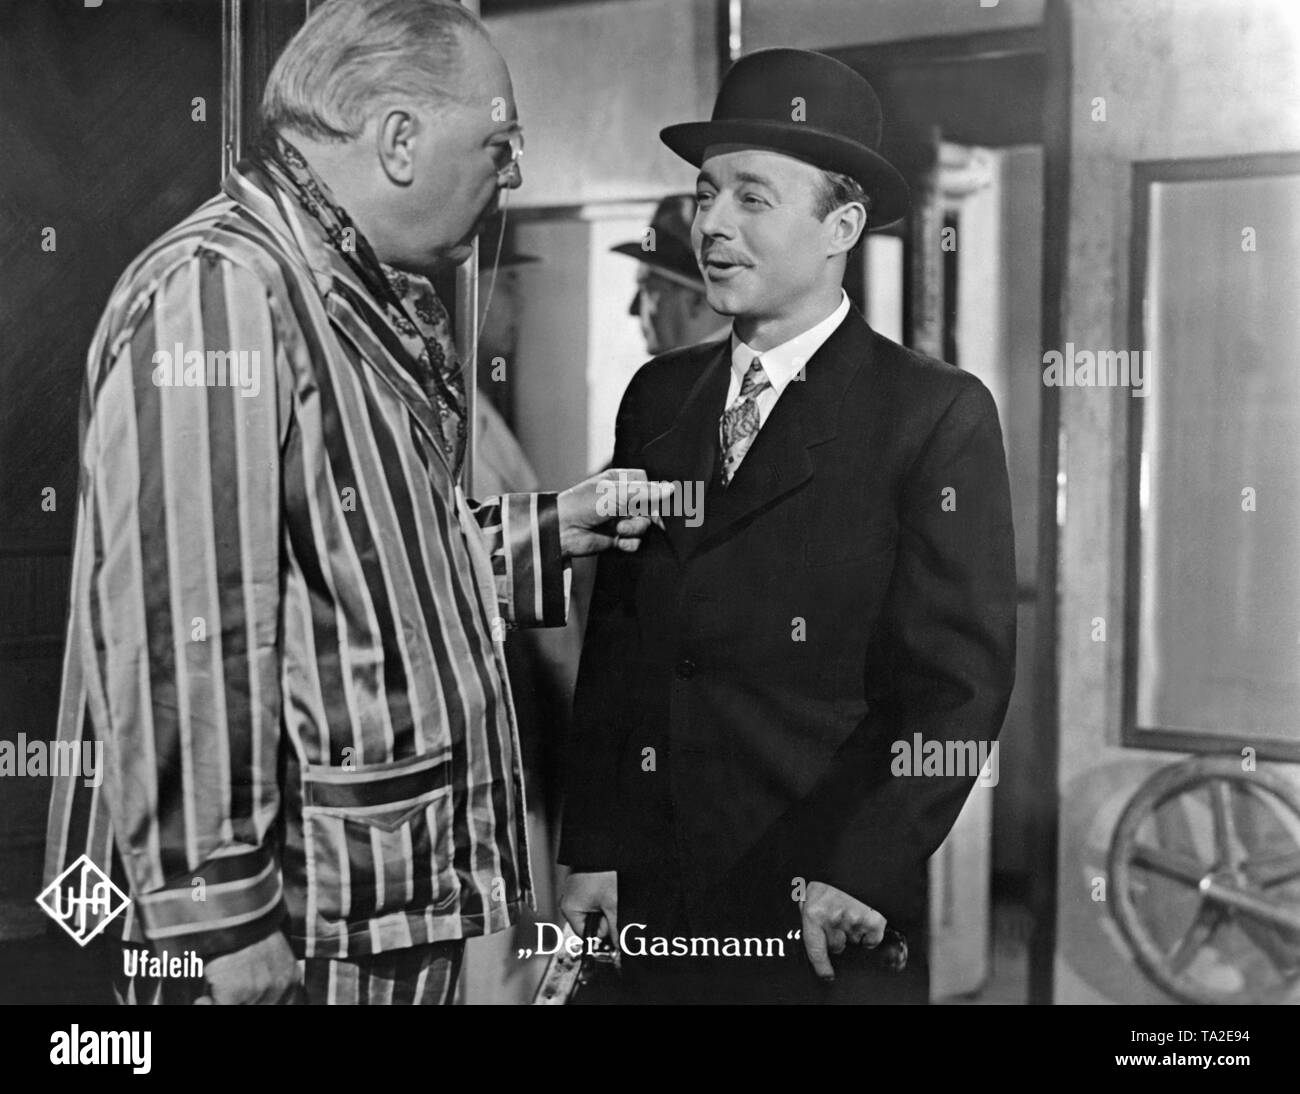 Heinz Ruehmann as Hermann Knittel (right) and Walter Steinbeck as an unknown gentleman in the film 'The Gasman' by Carl Froehlich, based on the novel by Heinrich Spoerl. Stock Photo